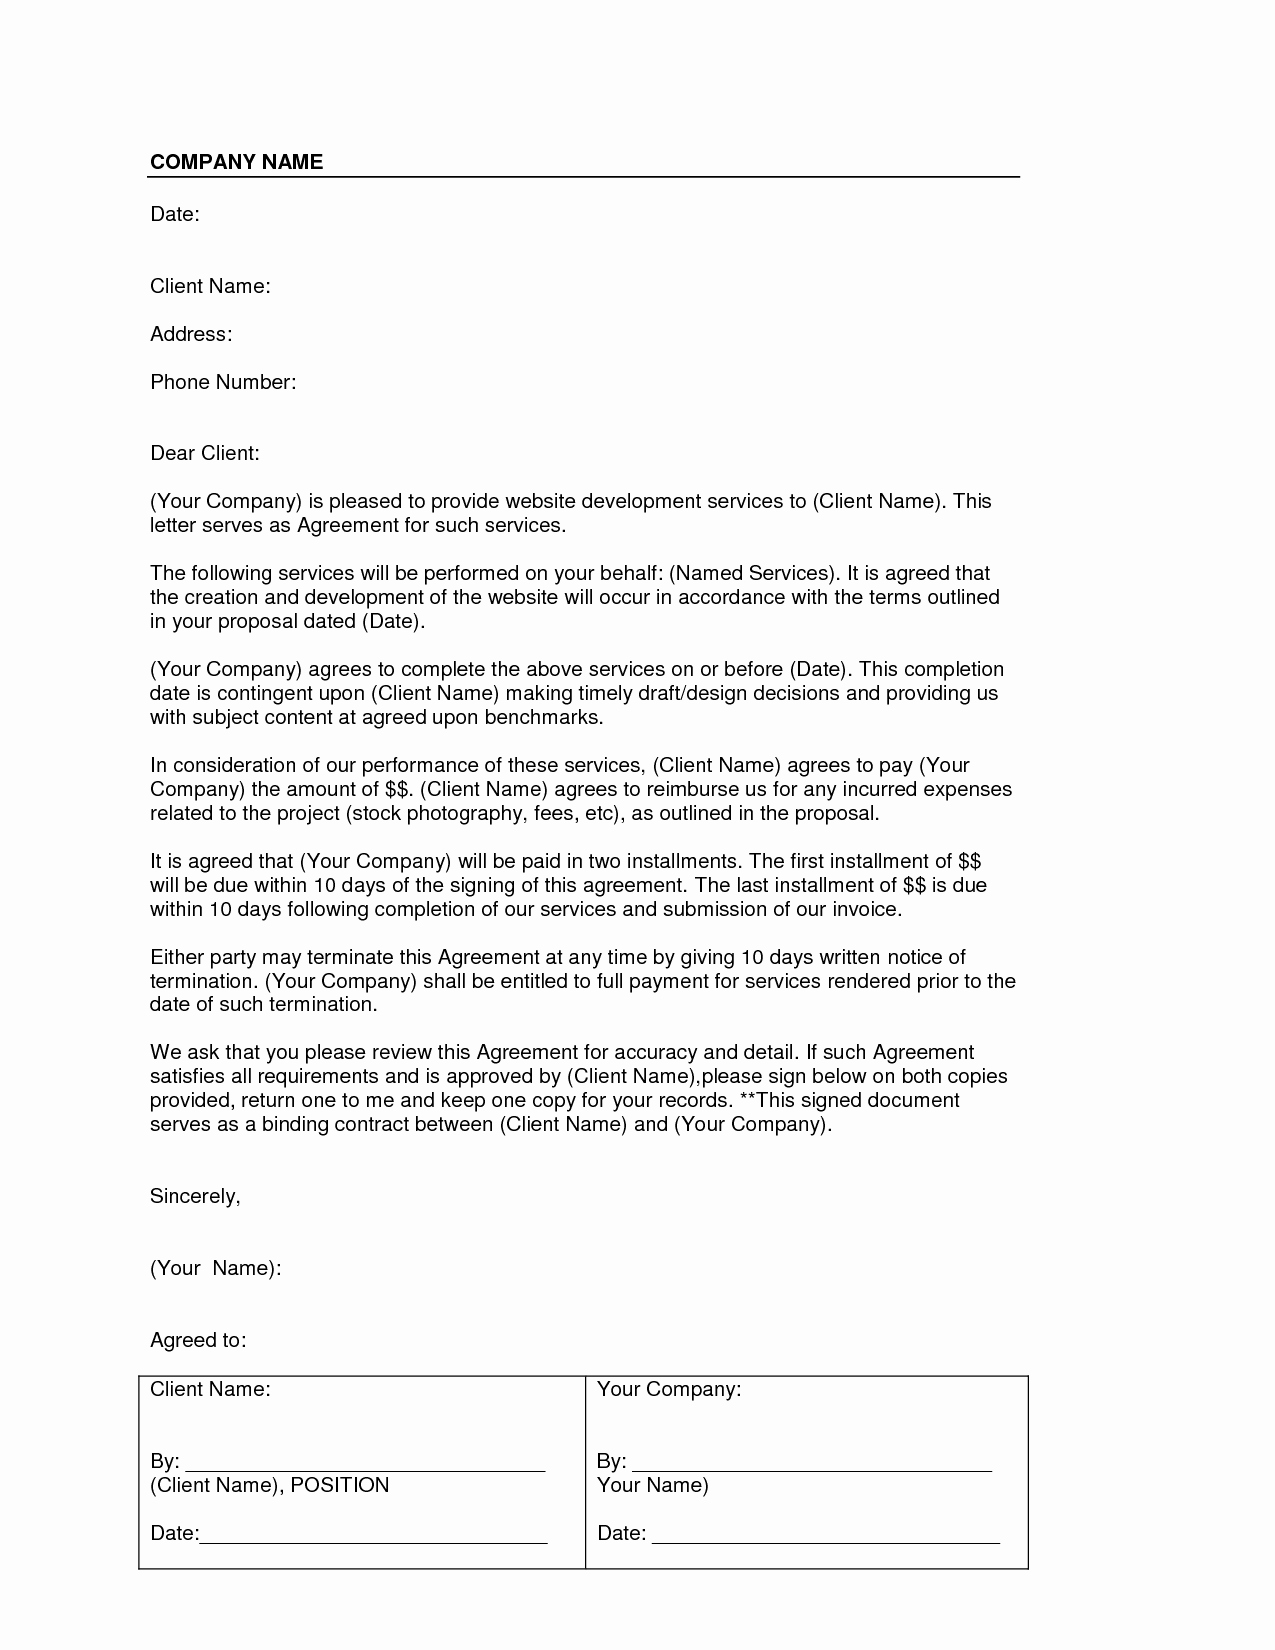 Letter Of Agreement Template Best Of Printable Sample Letter Of Agreement form